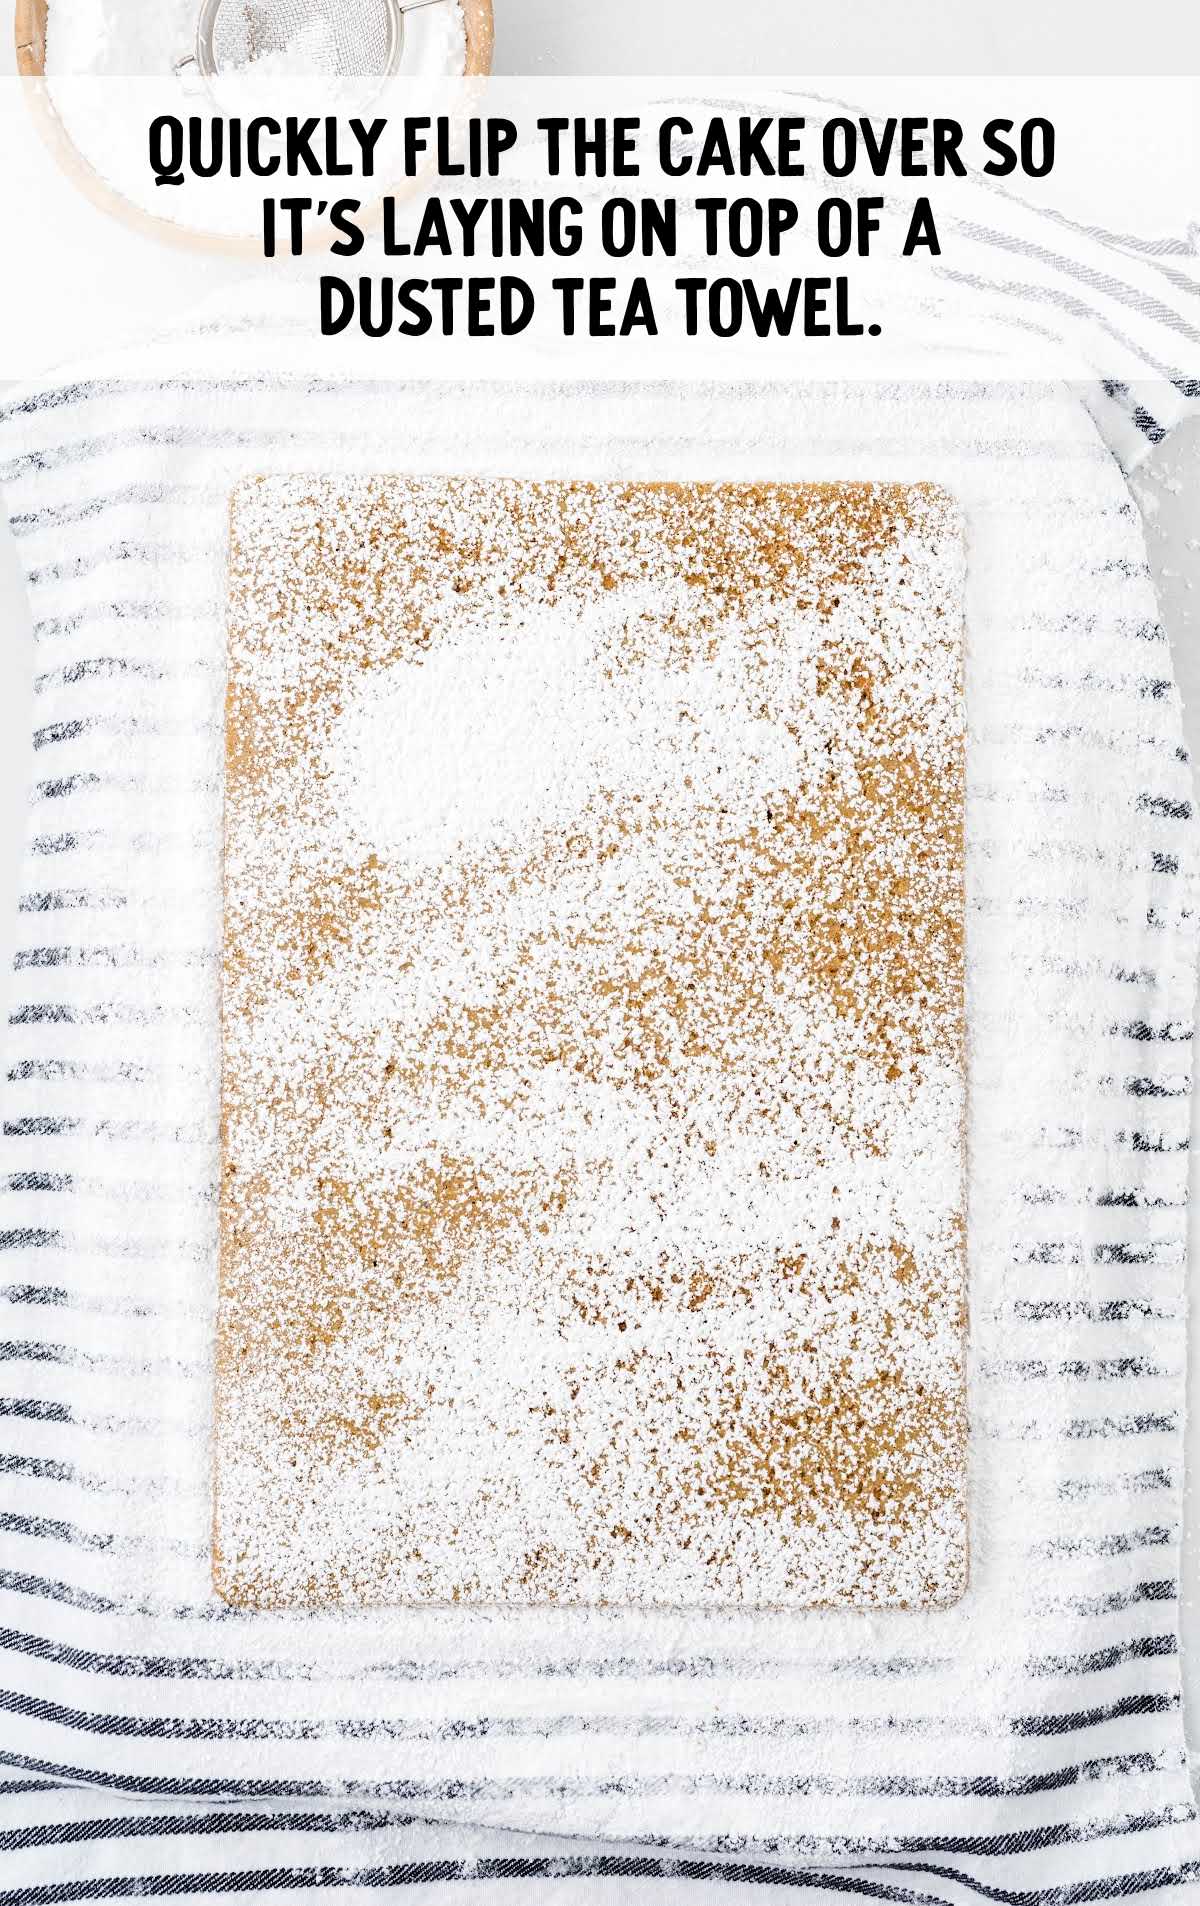 caked dusted with flour on a tea towel